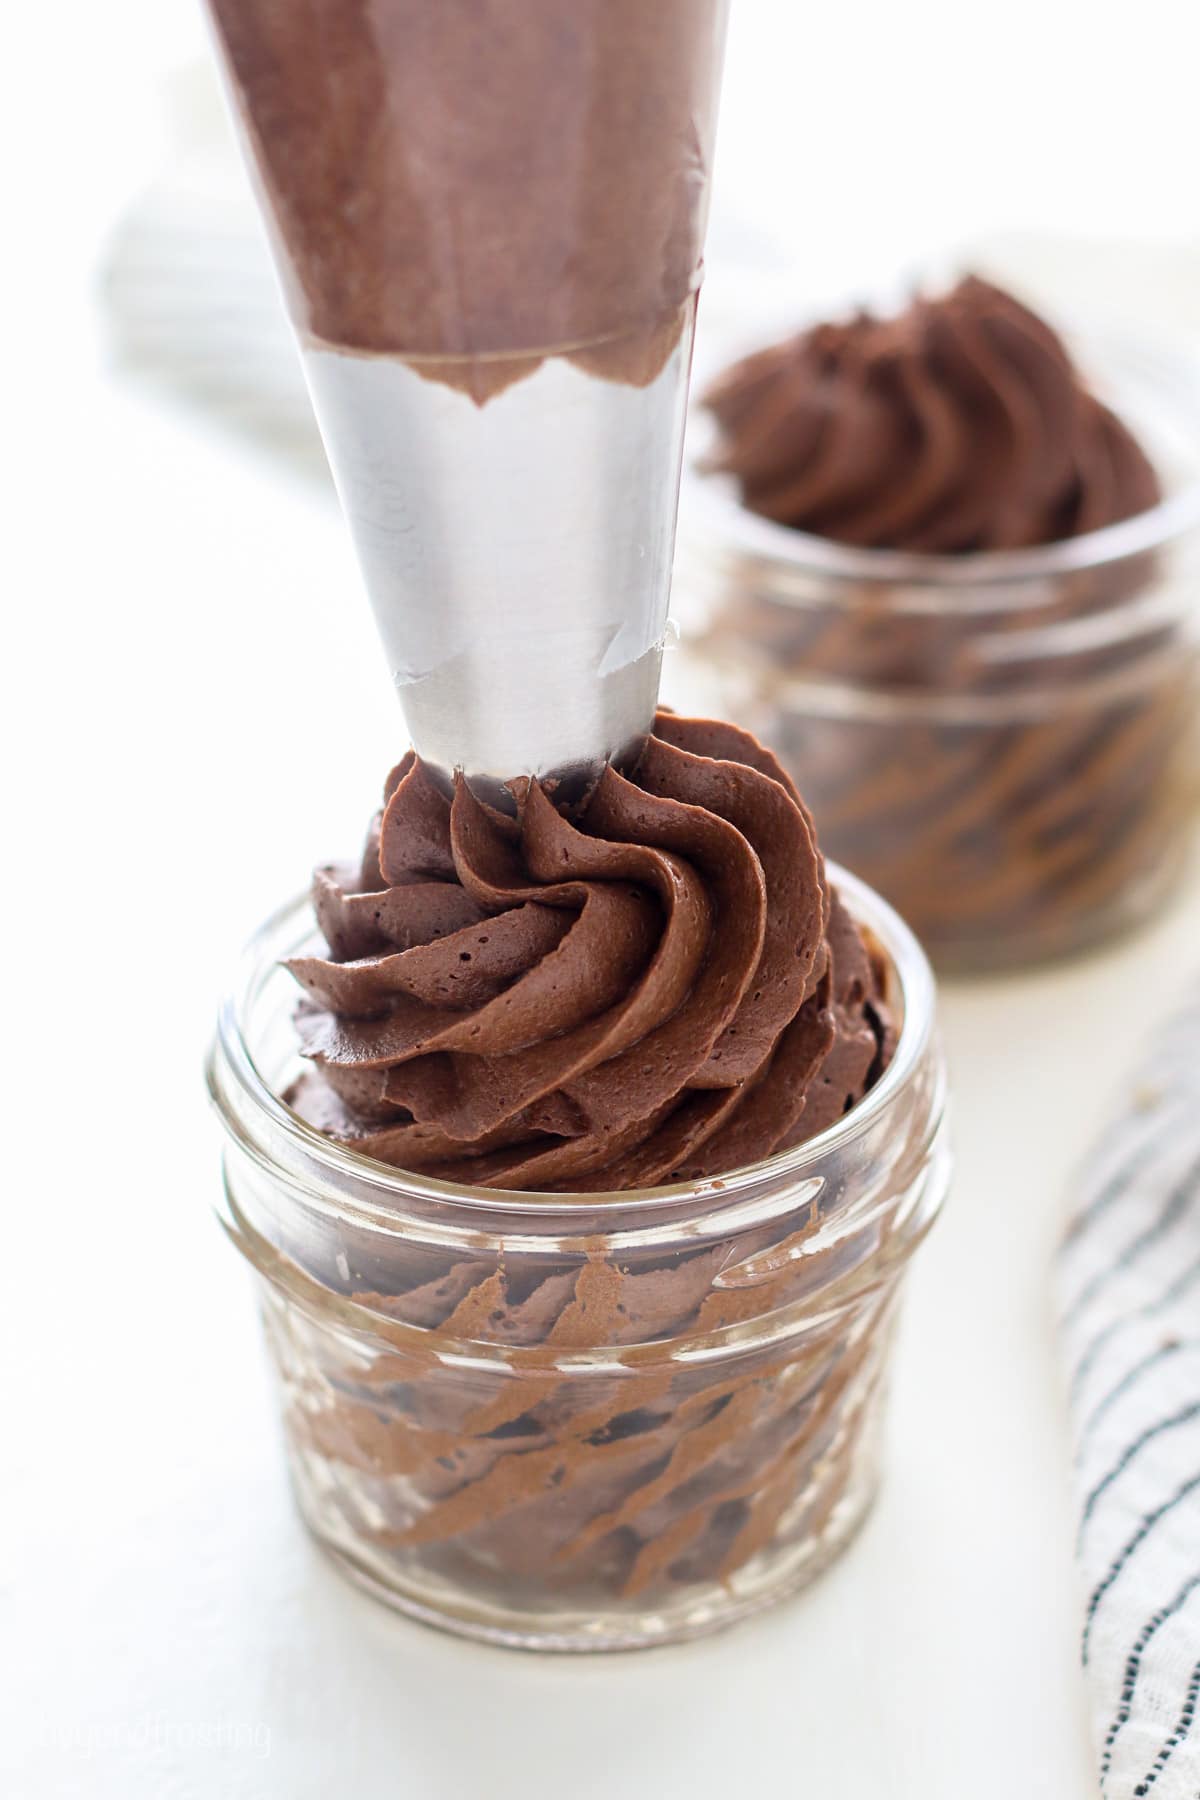 A piping tip pipes a swirl of chocolate fudge frosting into a glass jar, with a second jar of piped frosting in the background.